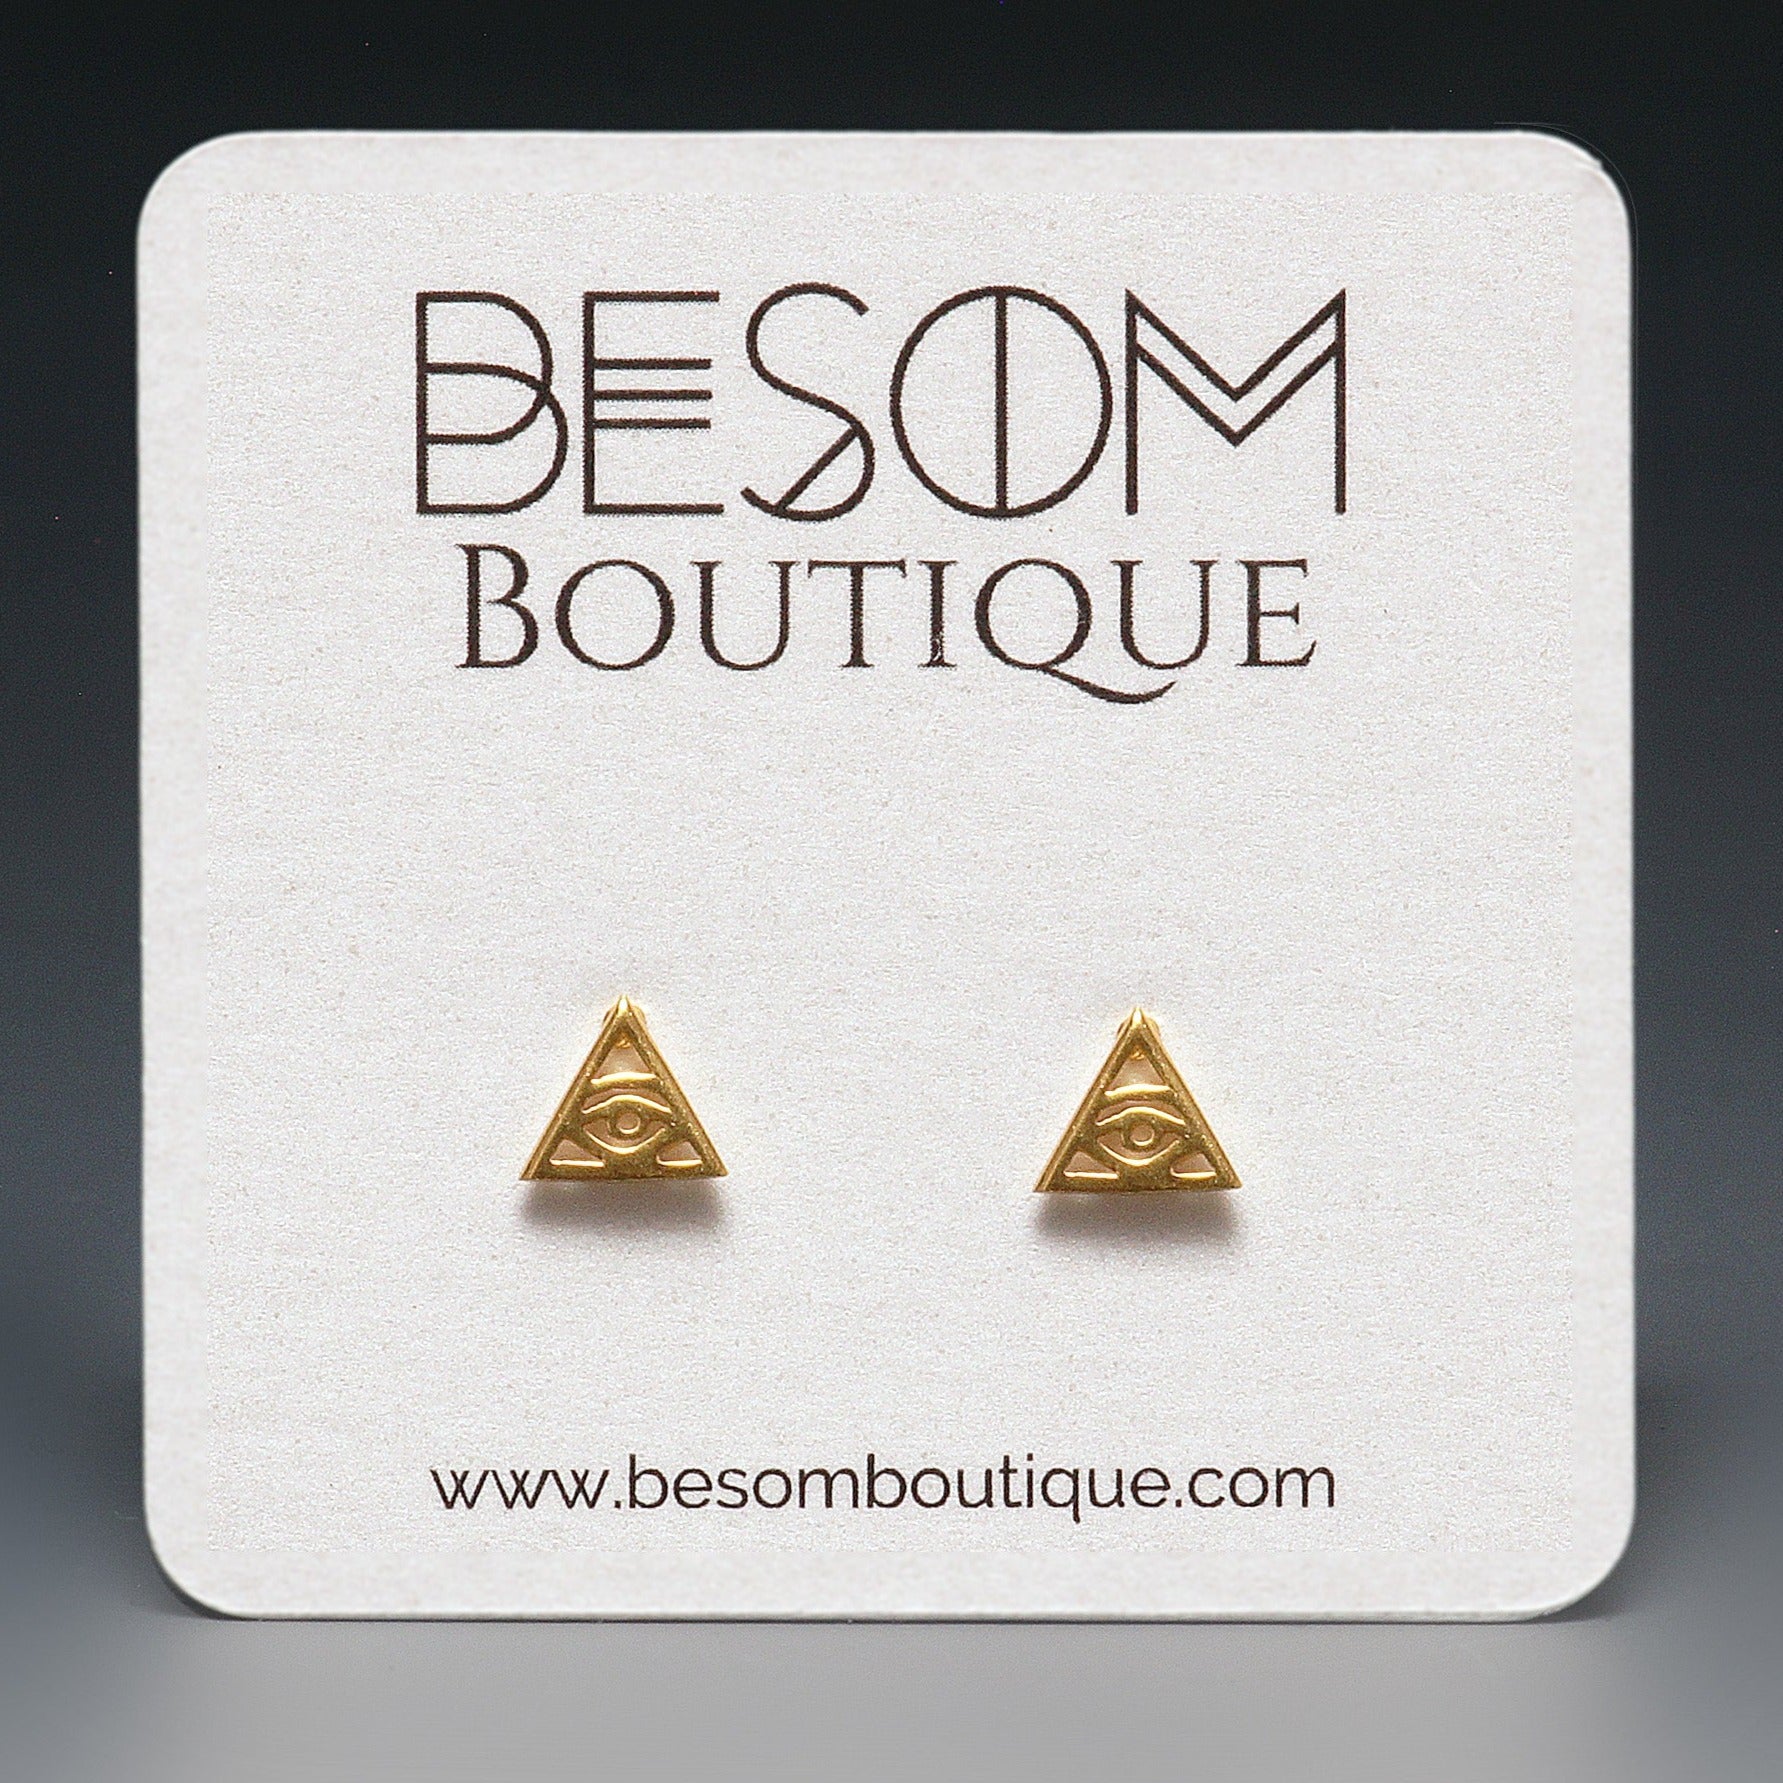 All Seeing Eye Stud Earrings in Gold Besom Boutique